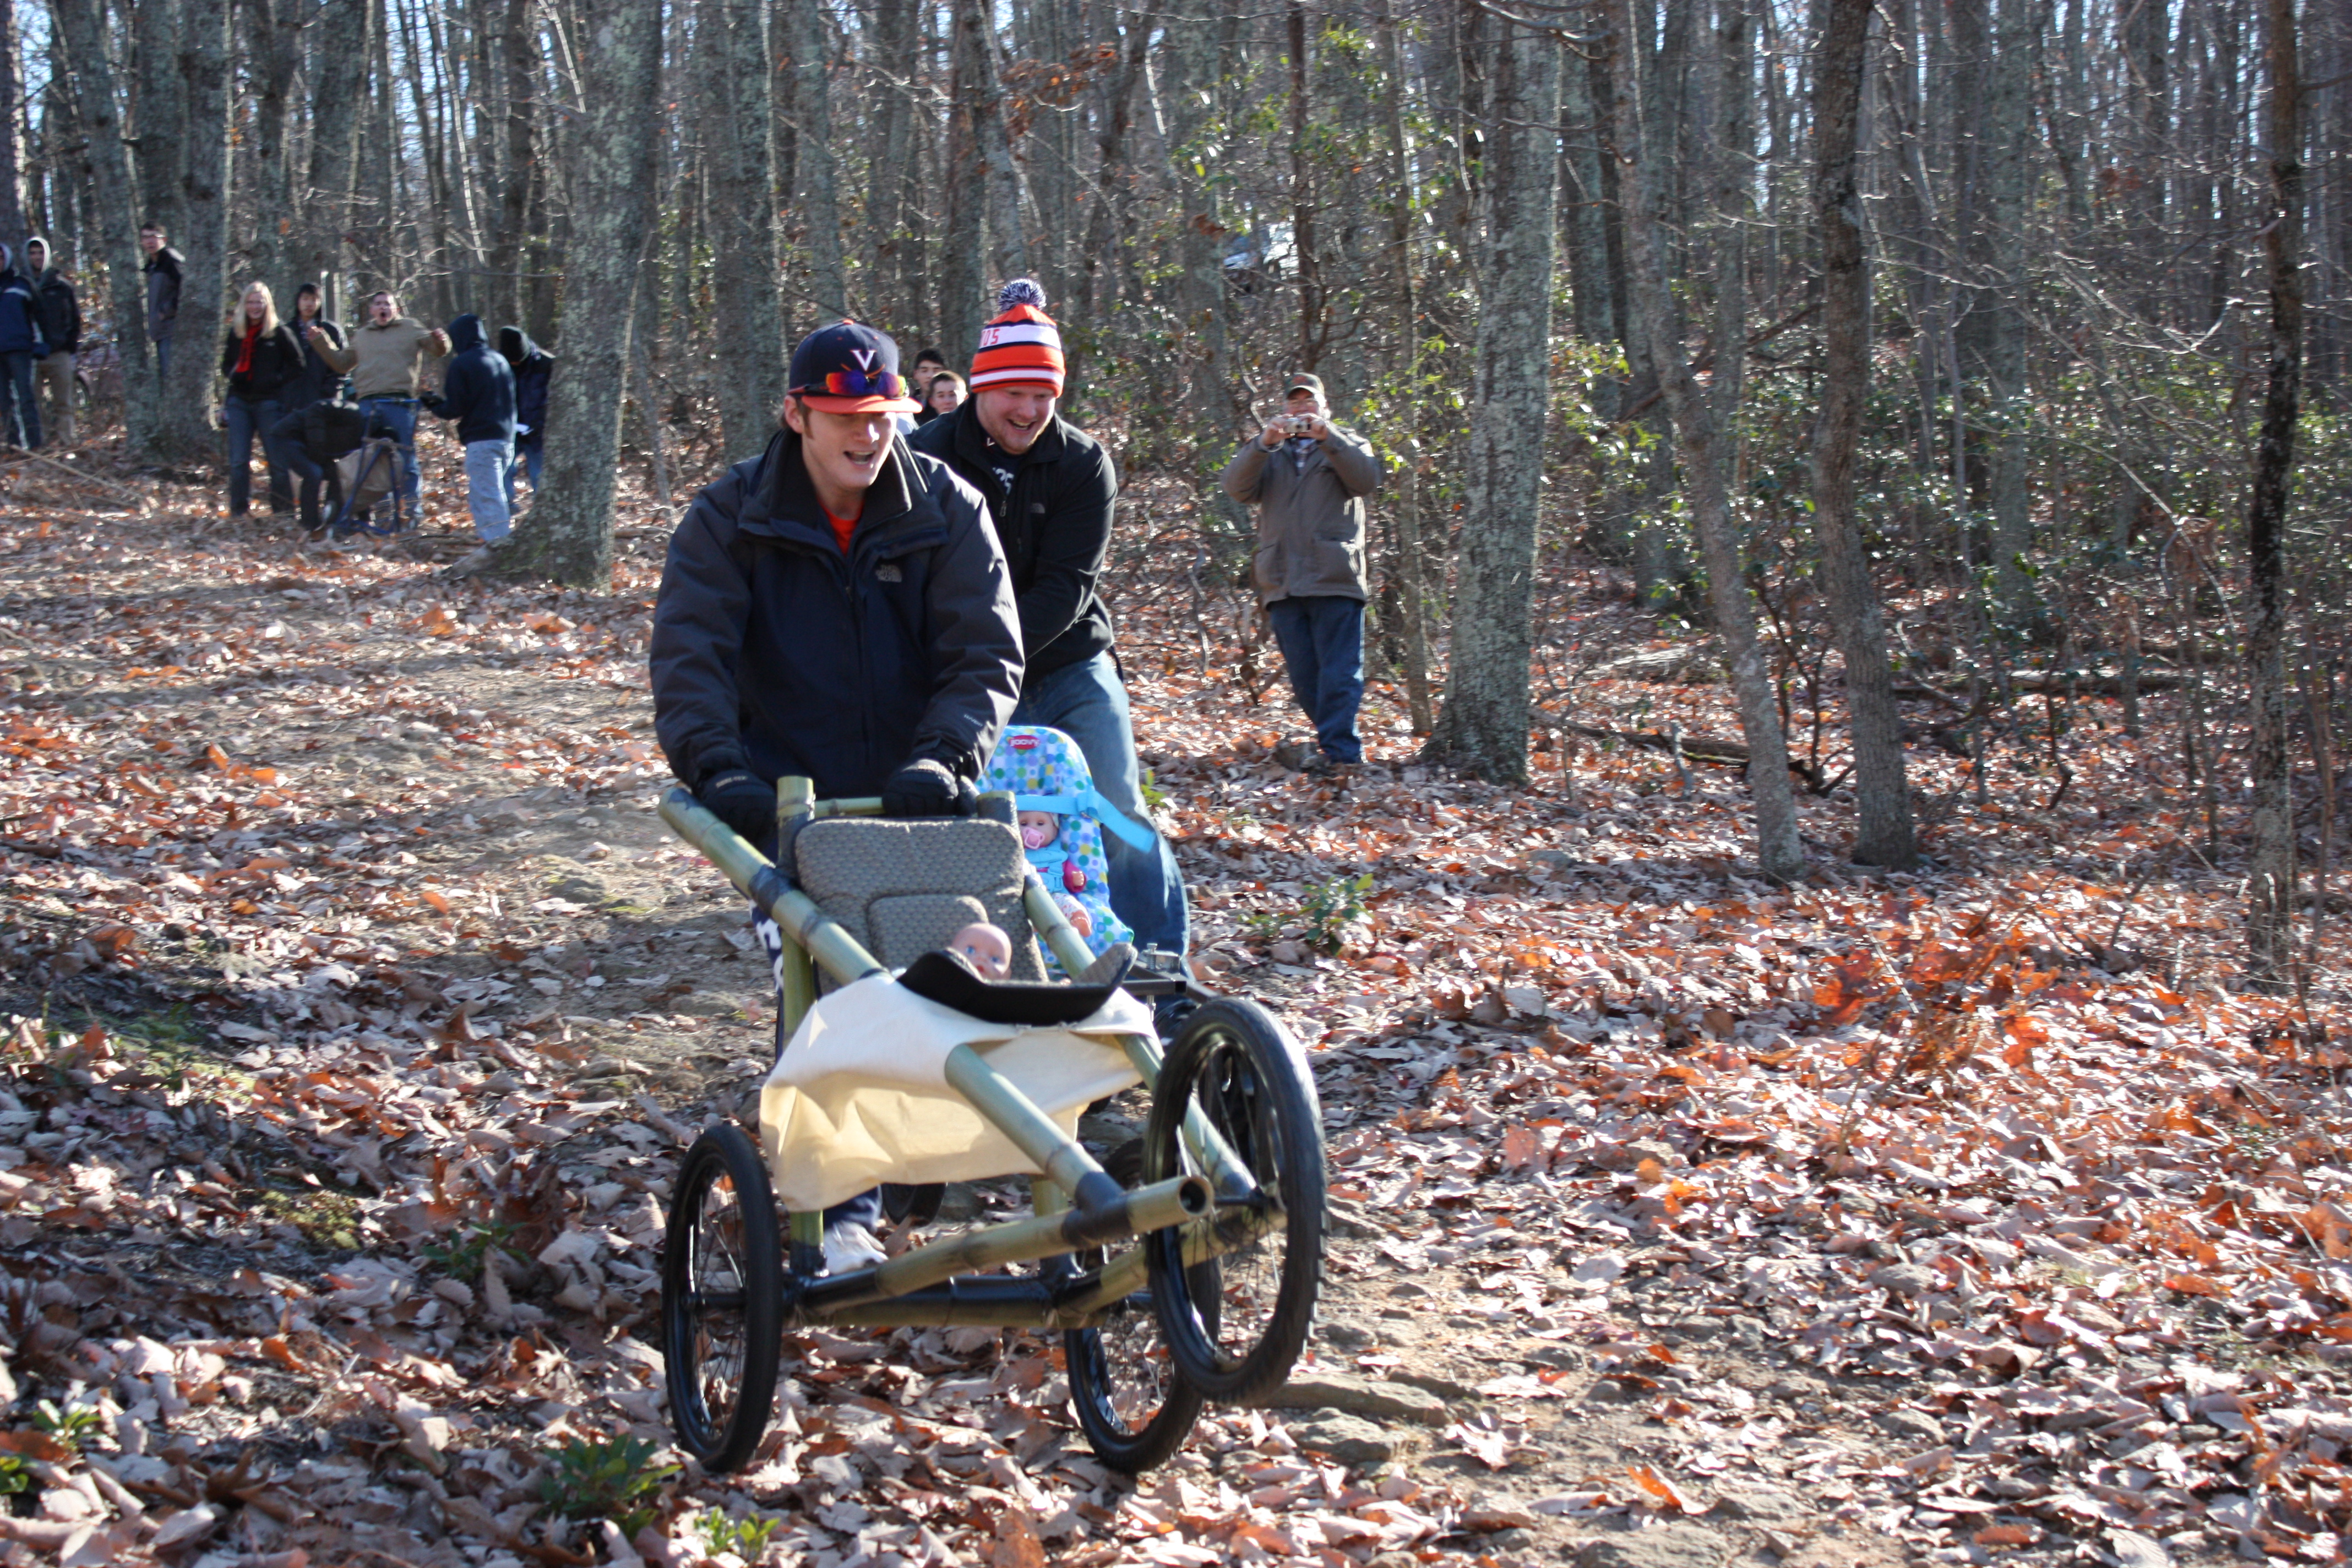 Ryan Slater (front) with his team's  homemade stroller pushing the stroller down a muddy rocky hill